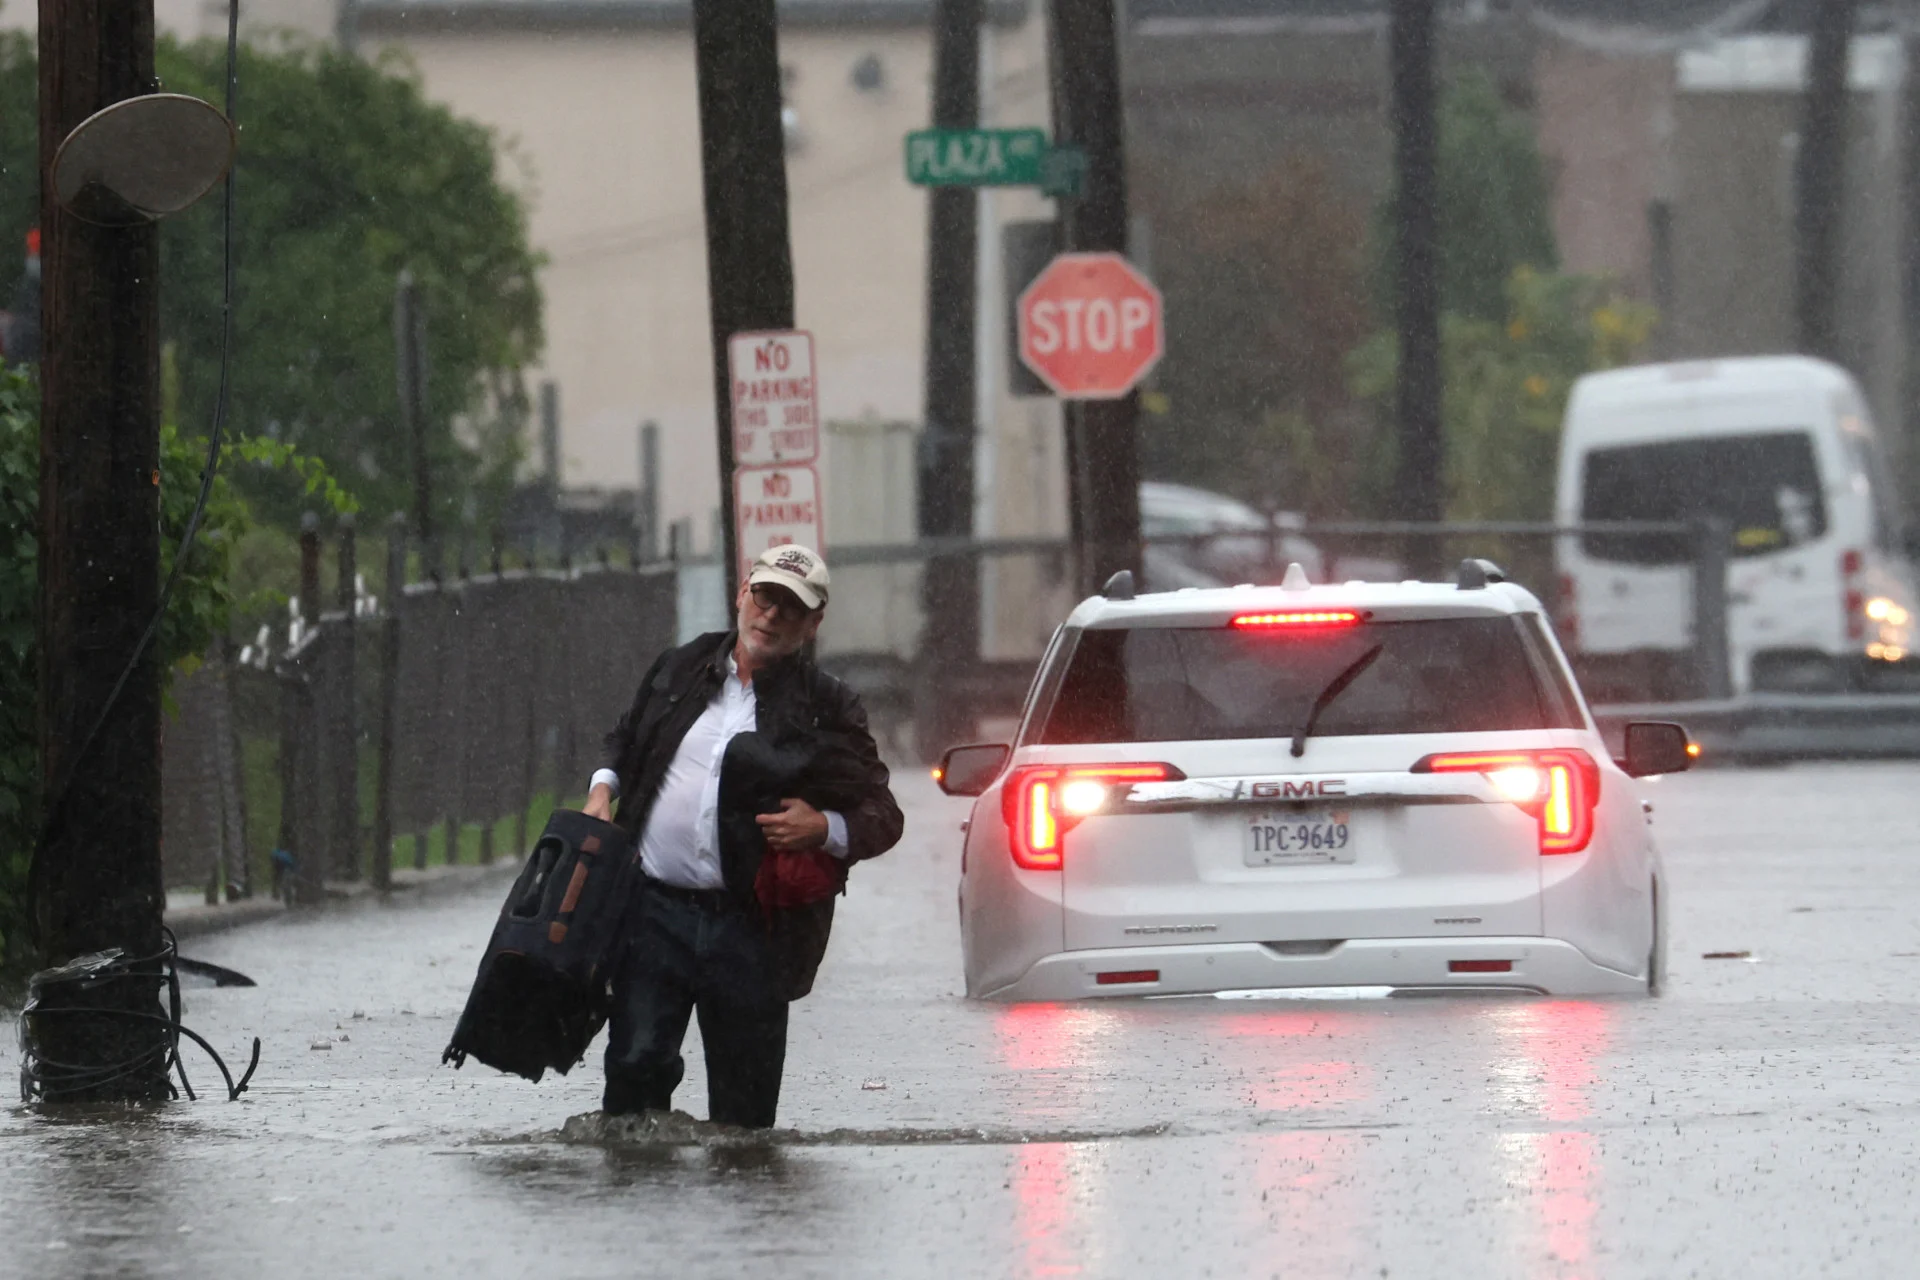 Streets turn into small lakes in New York as heavy rain triggers flooding